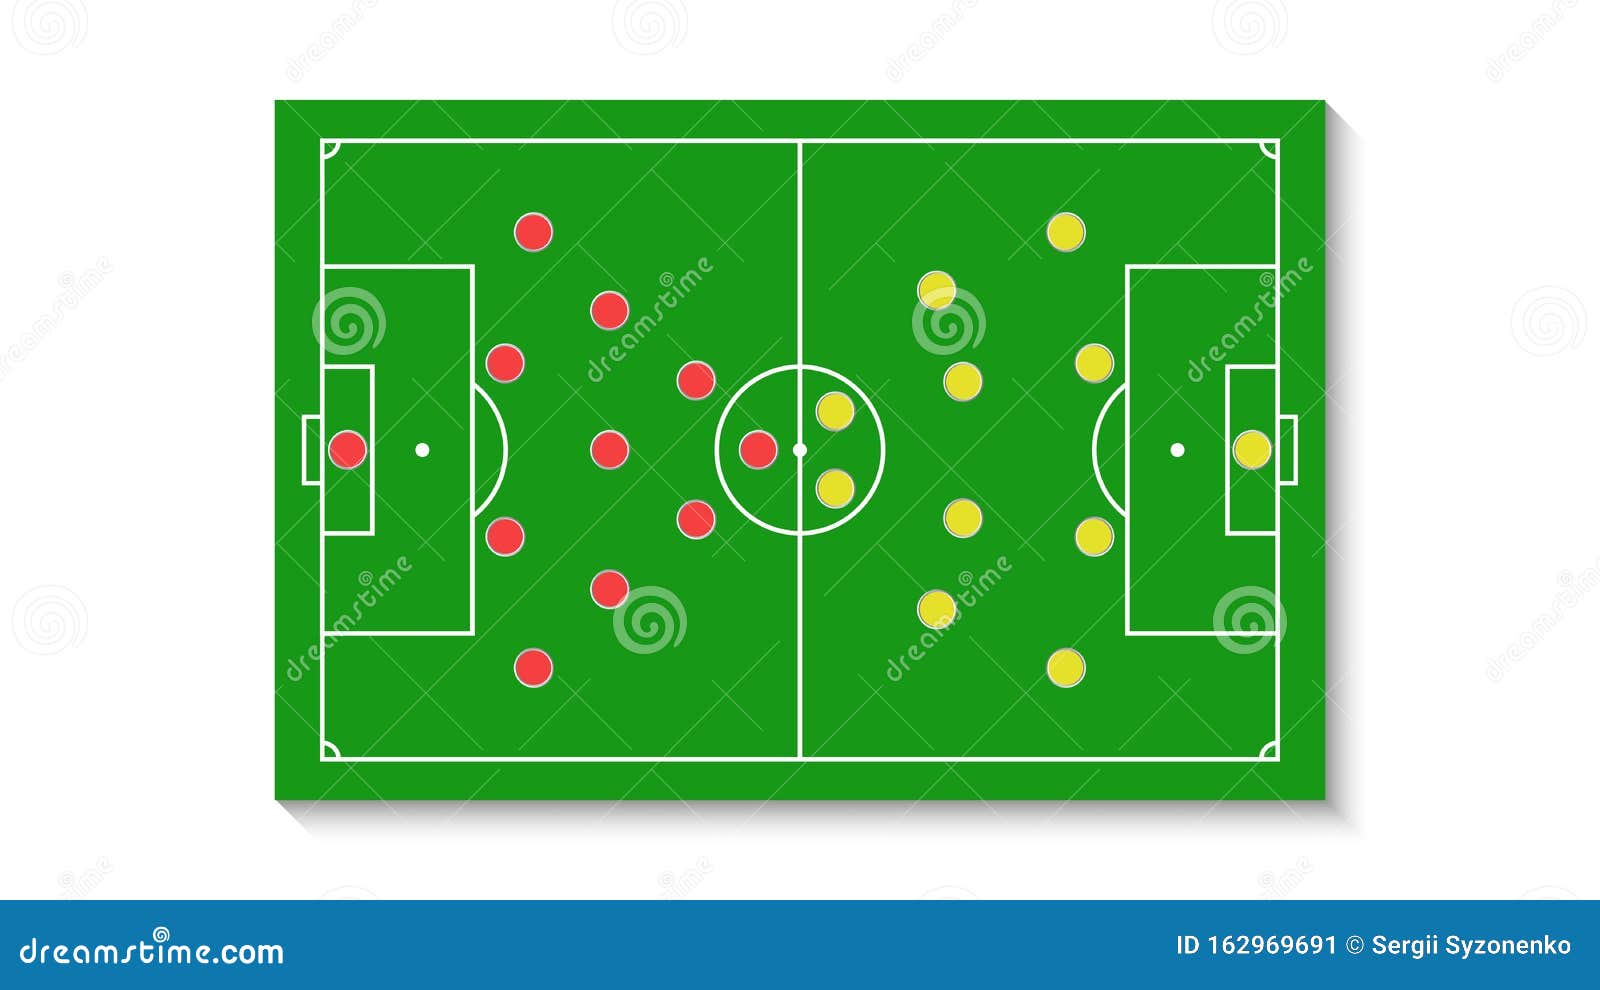 A Green Football Field With A Tactical Scheme Of The